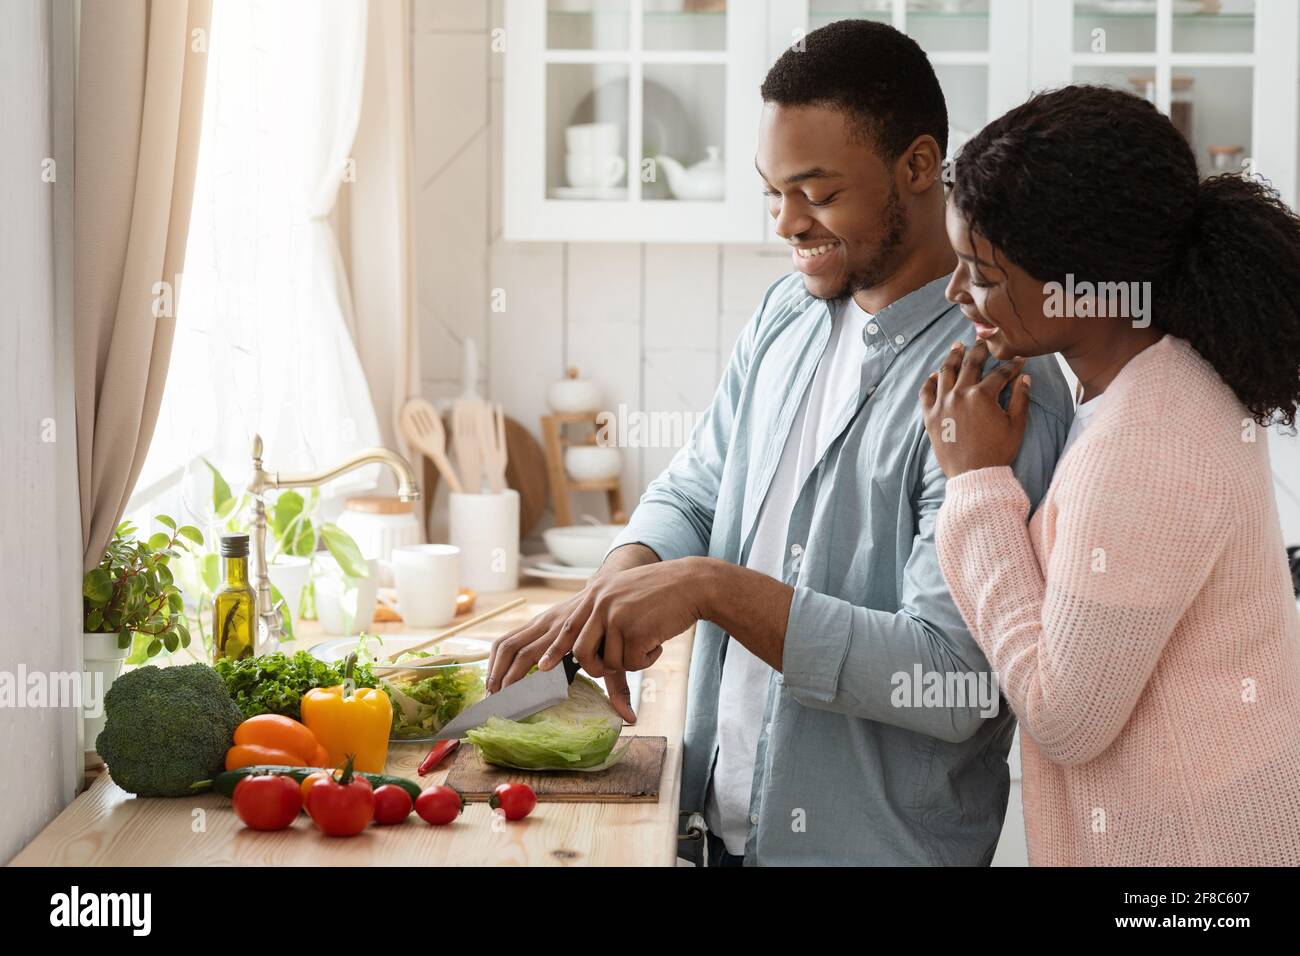 Cooking Together. Portrait of happy affectionate black couple preparing lunch in kitchen Stock Photo